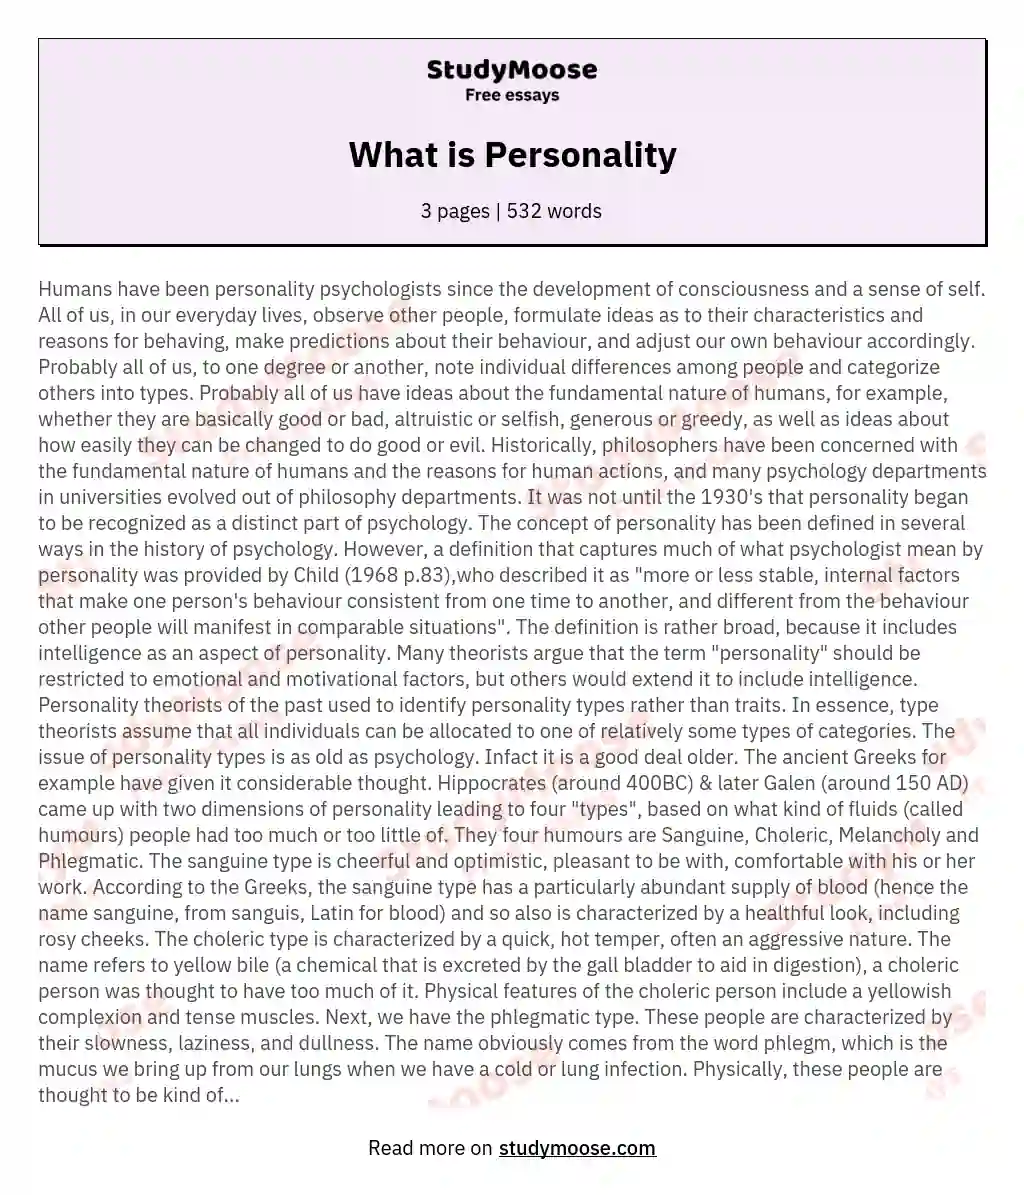 What is Personality essay